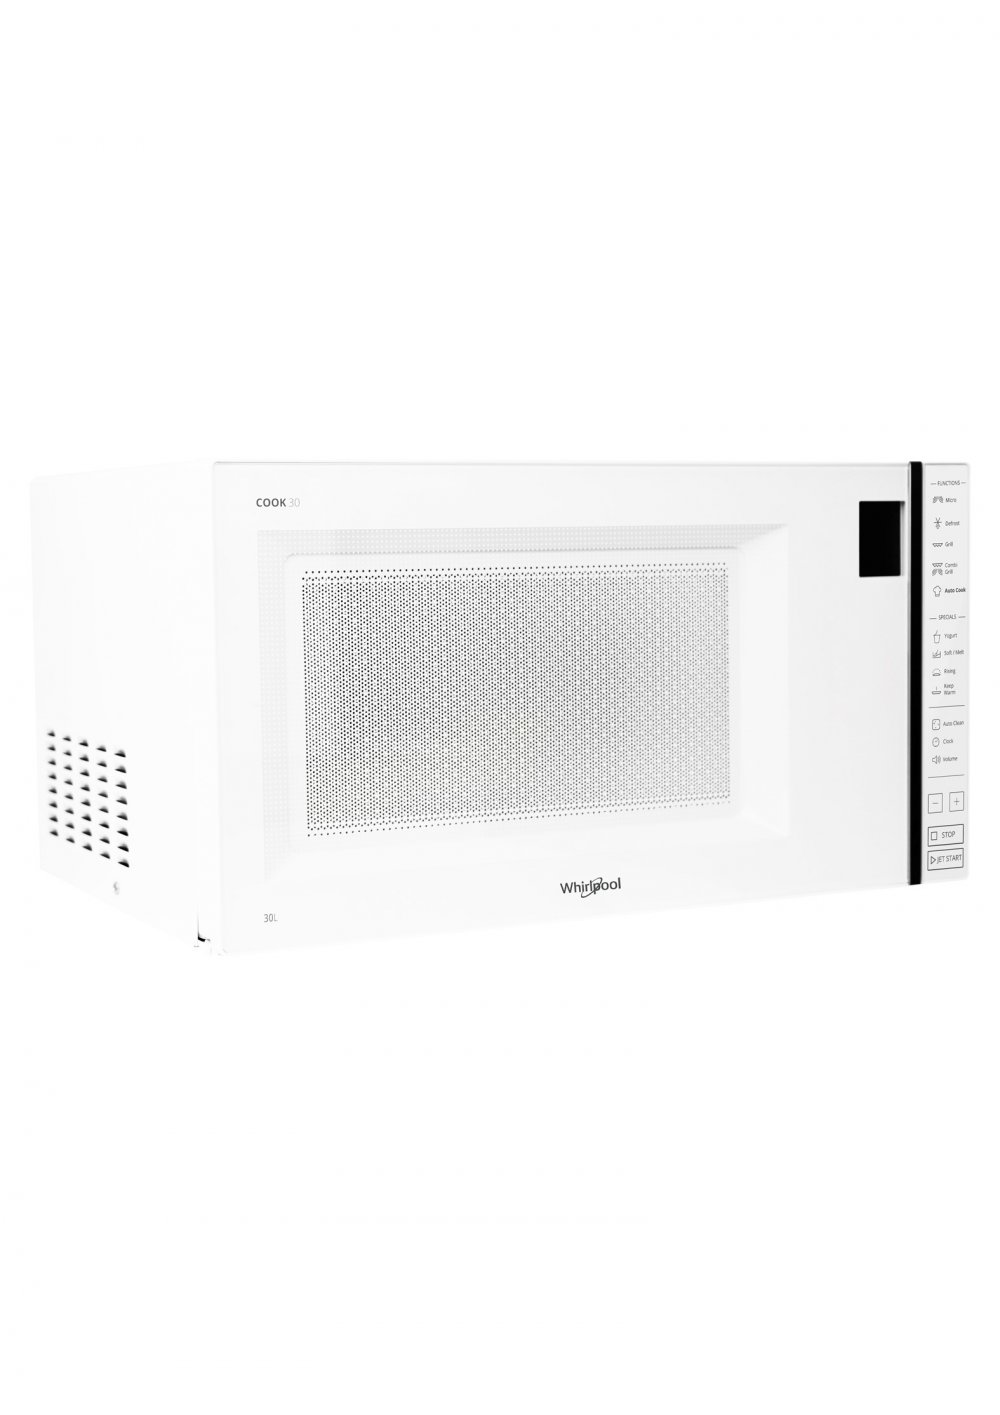 Microwave 30L, Gril-Wh